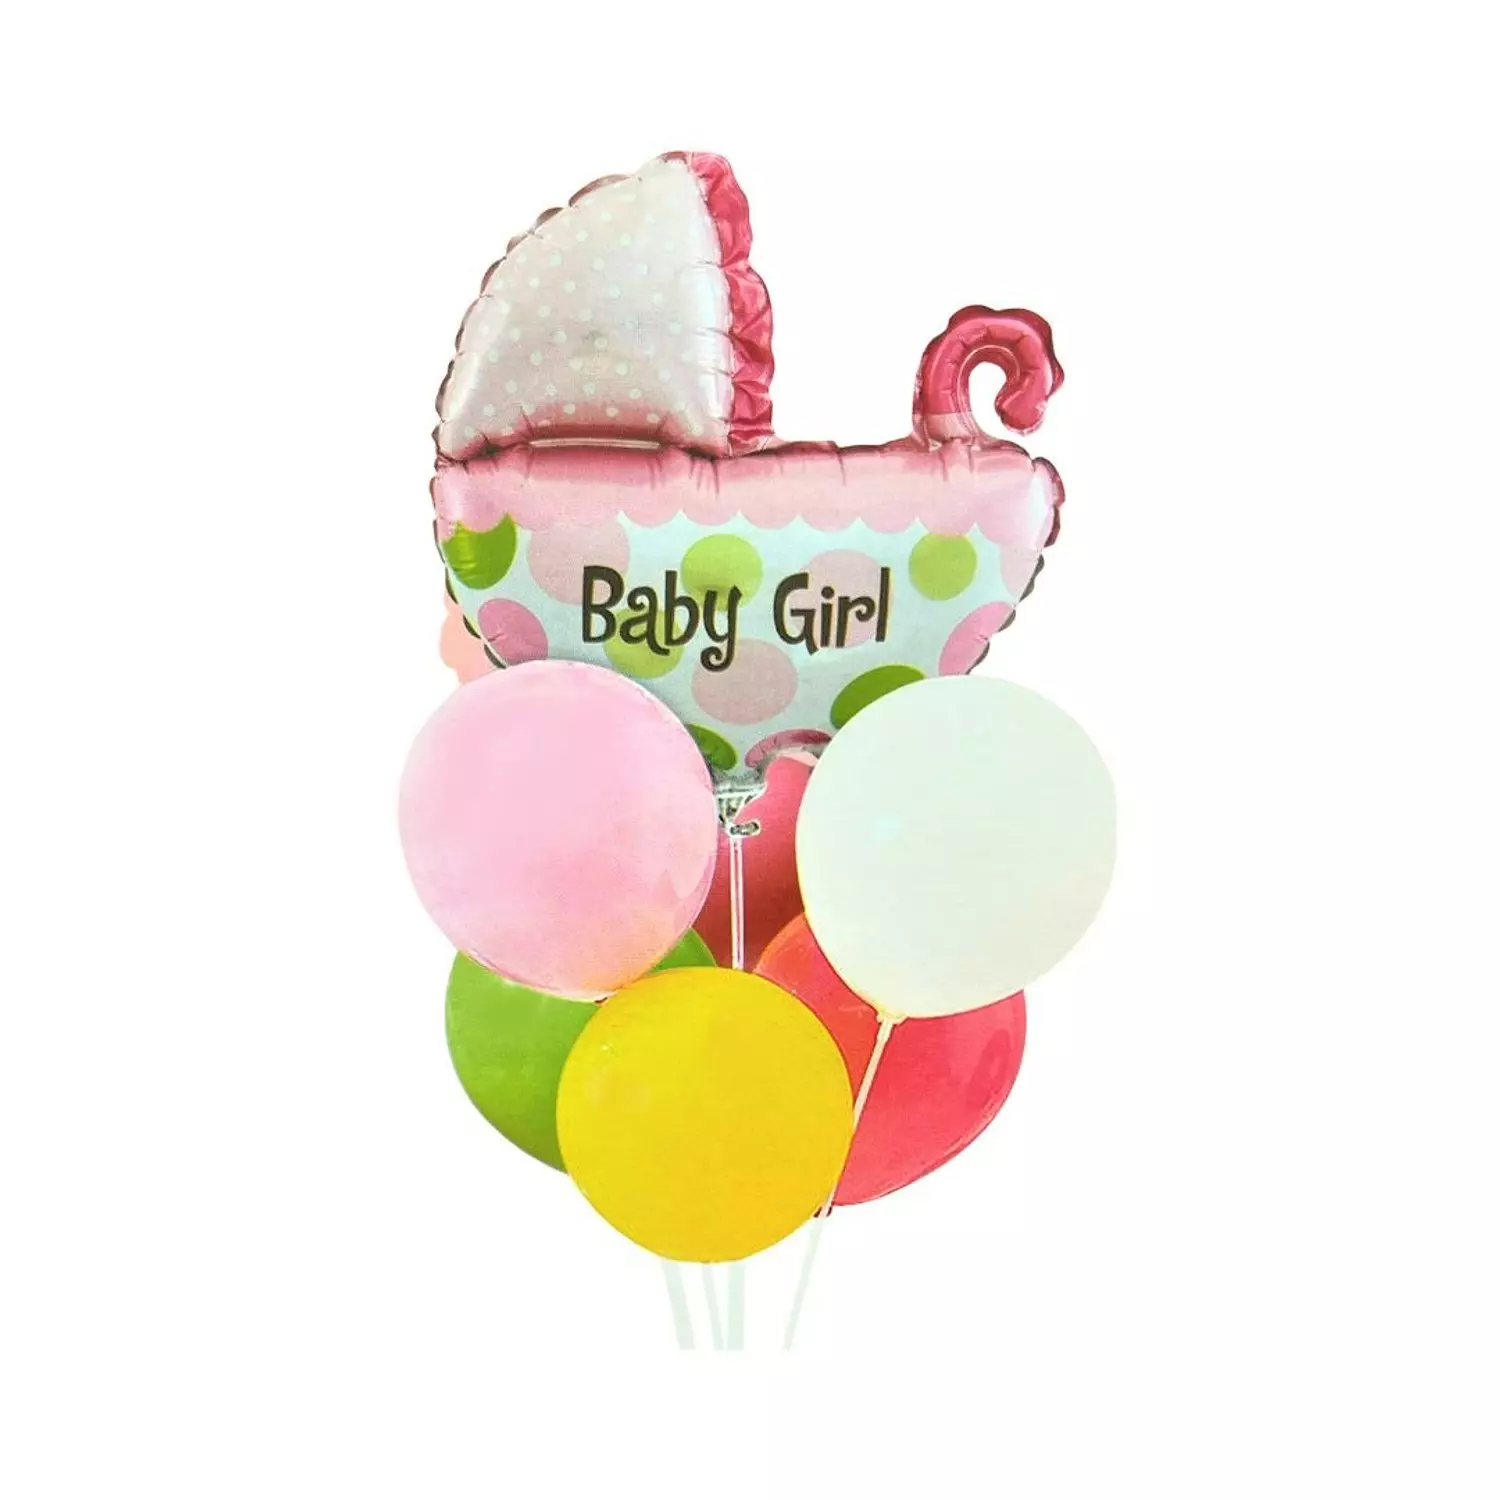 Baby Girl Balloon and Latex Collection hover image